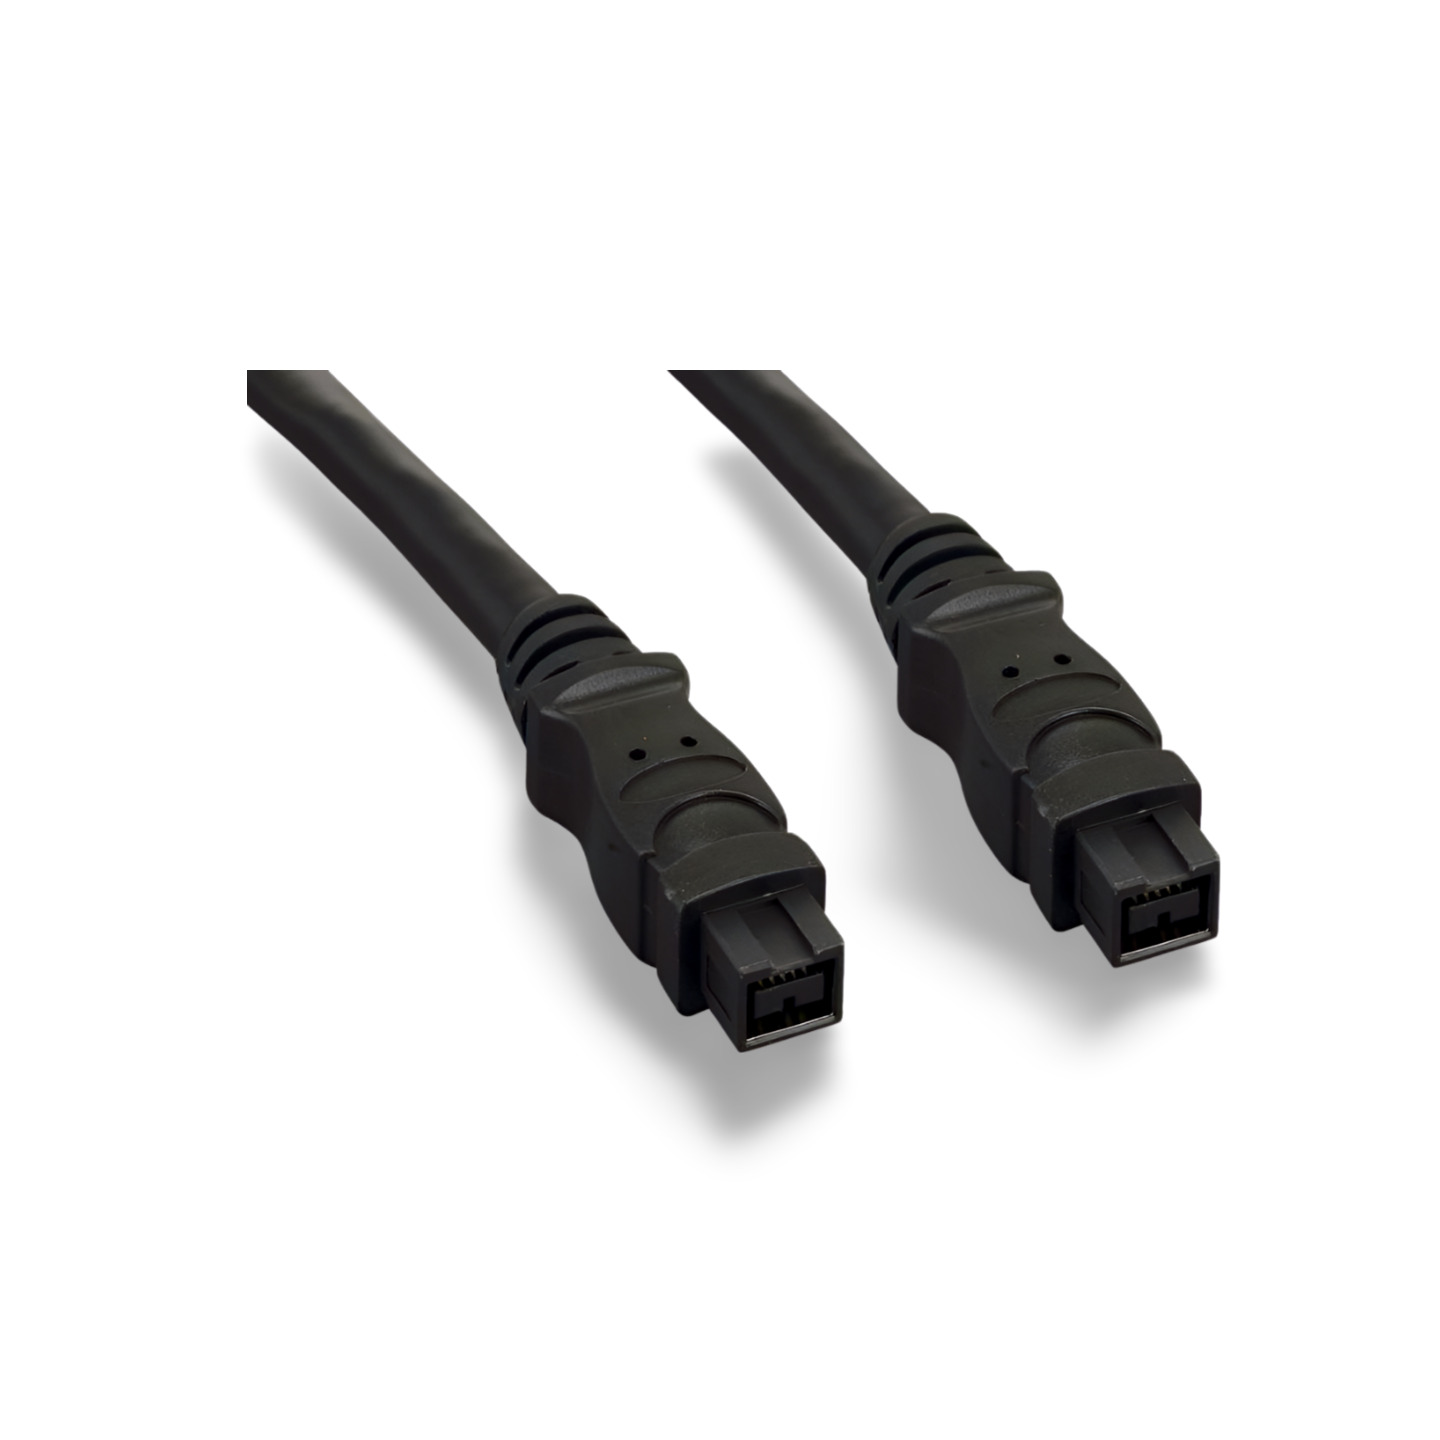 3ft FireWire IEEE 1394b Cable 9 Pin to 9 Pin - Black